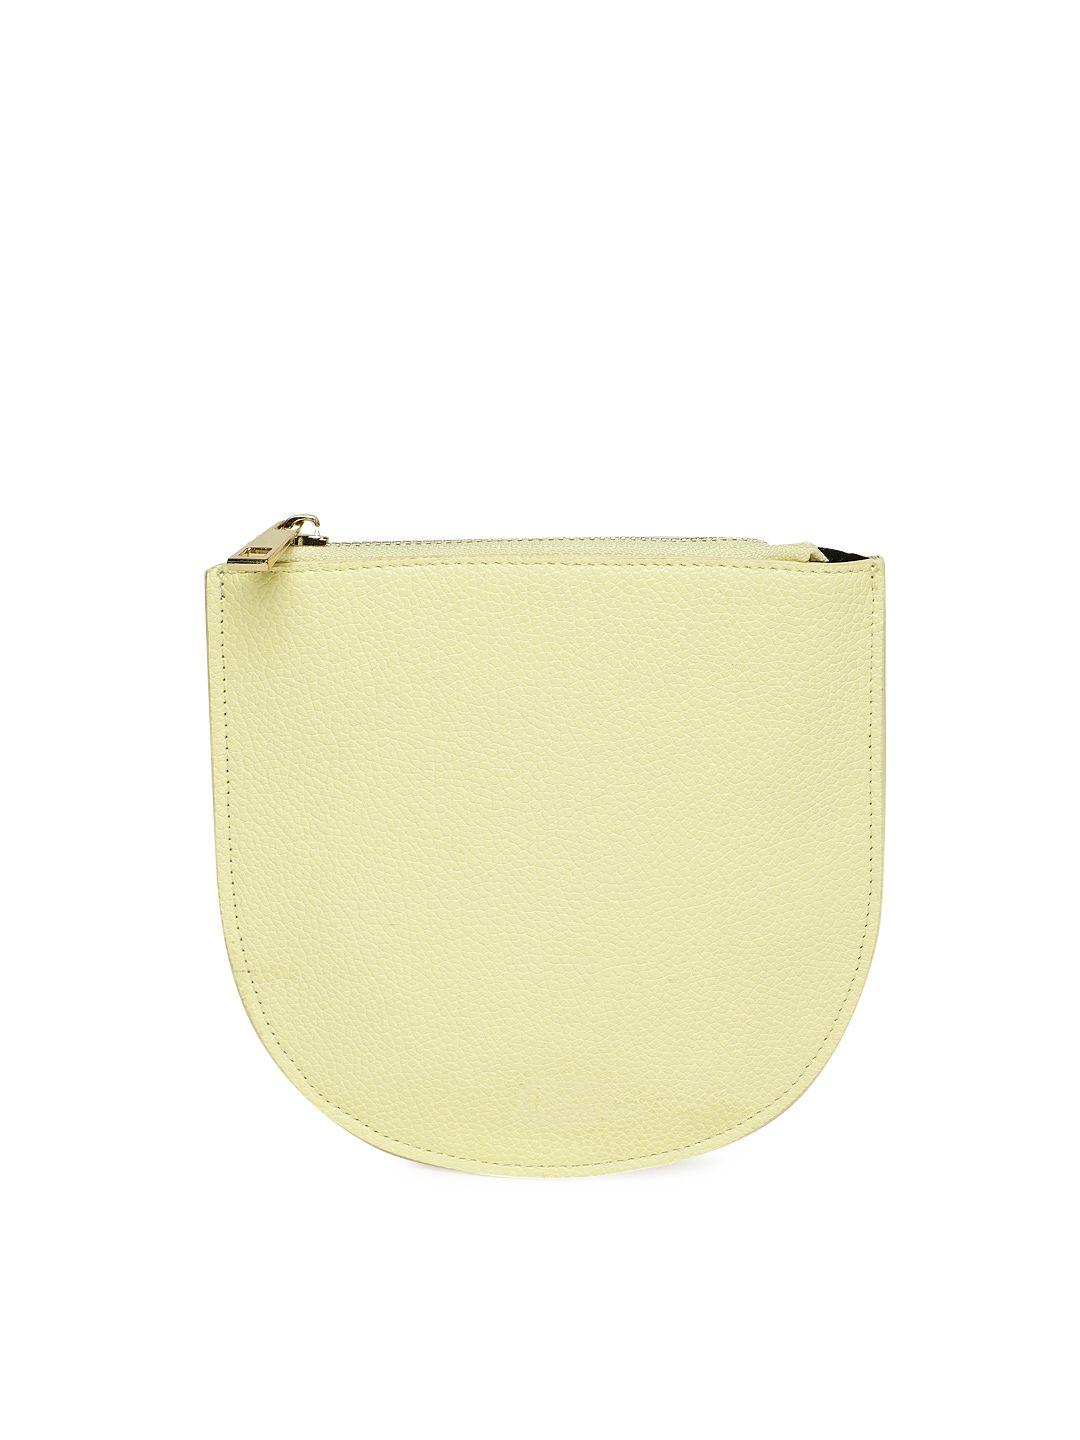 forever-21-yellow-solid-clutch